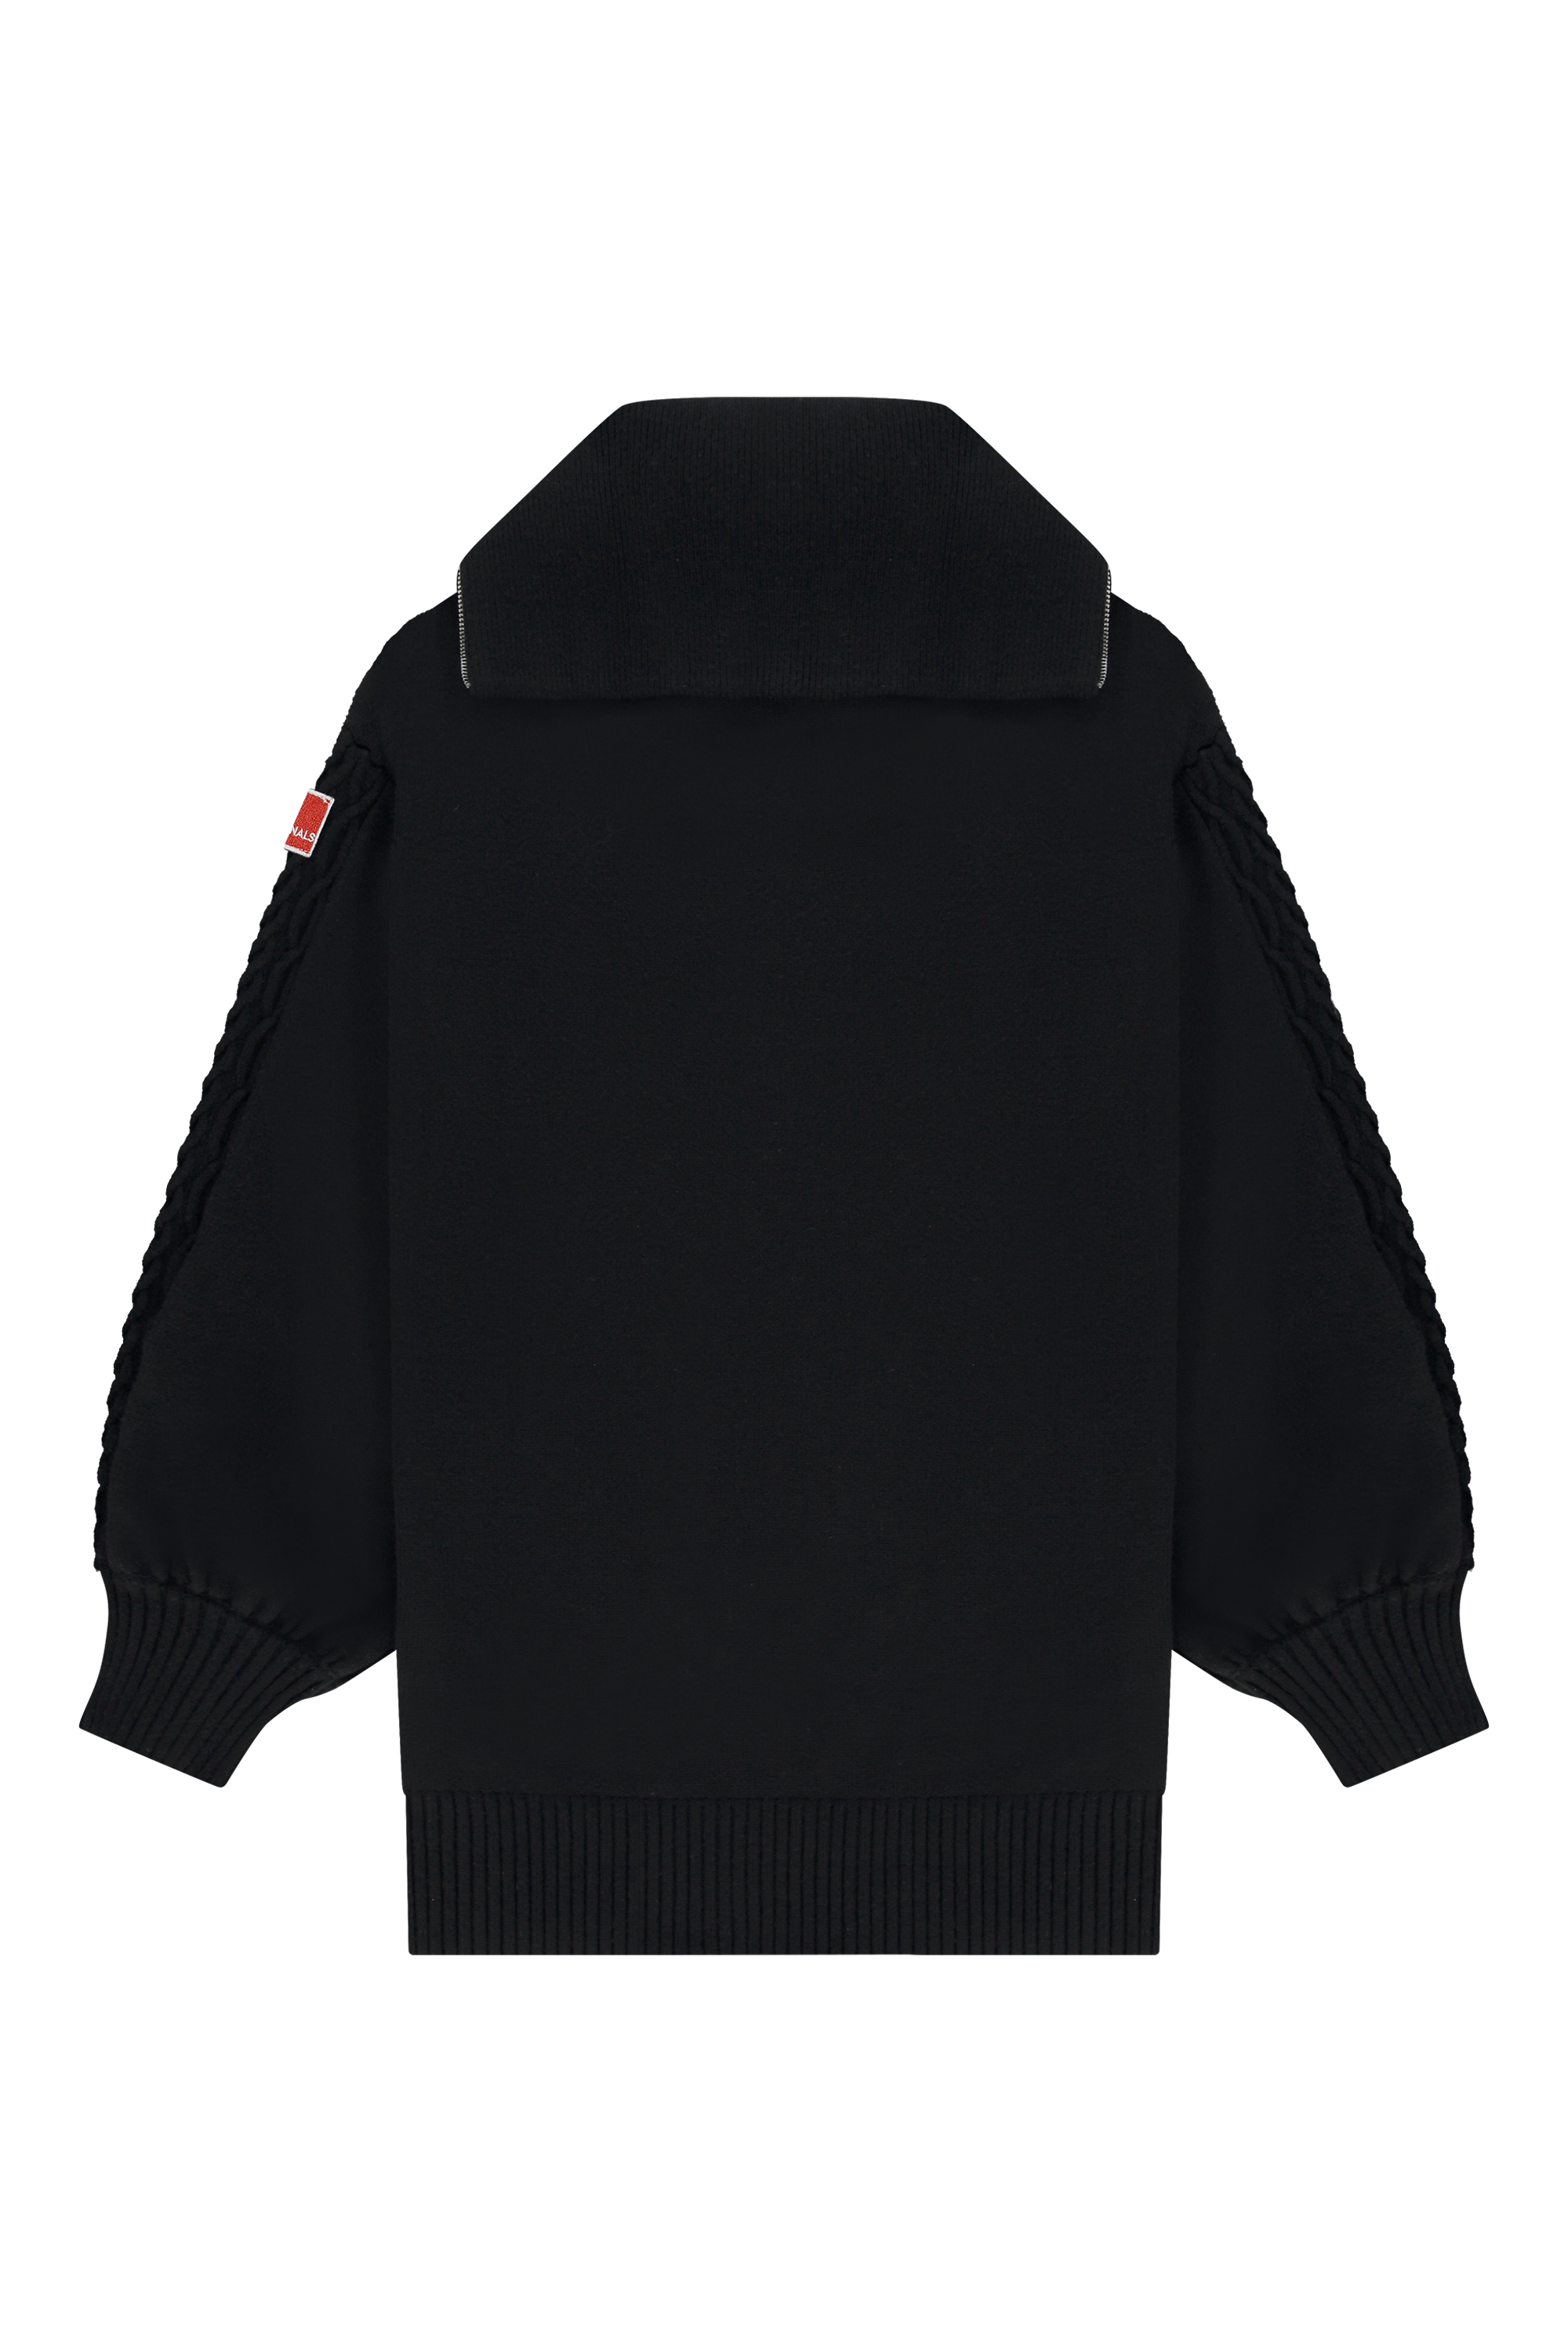 products-degreesknitsweater_black_back-png